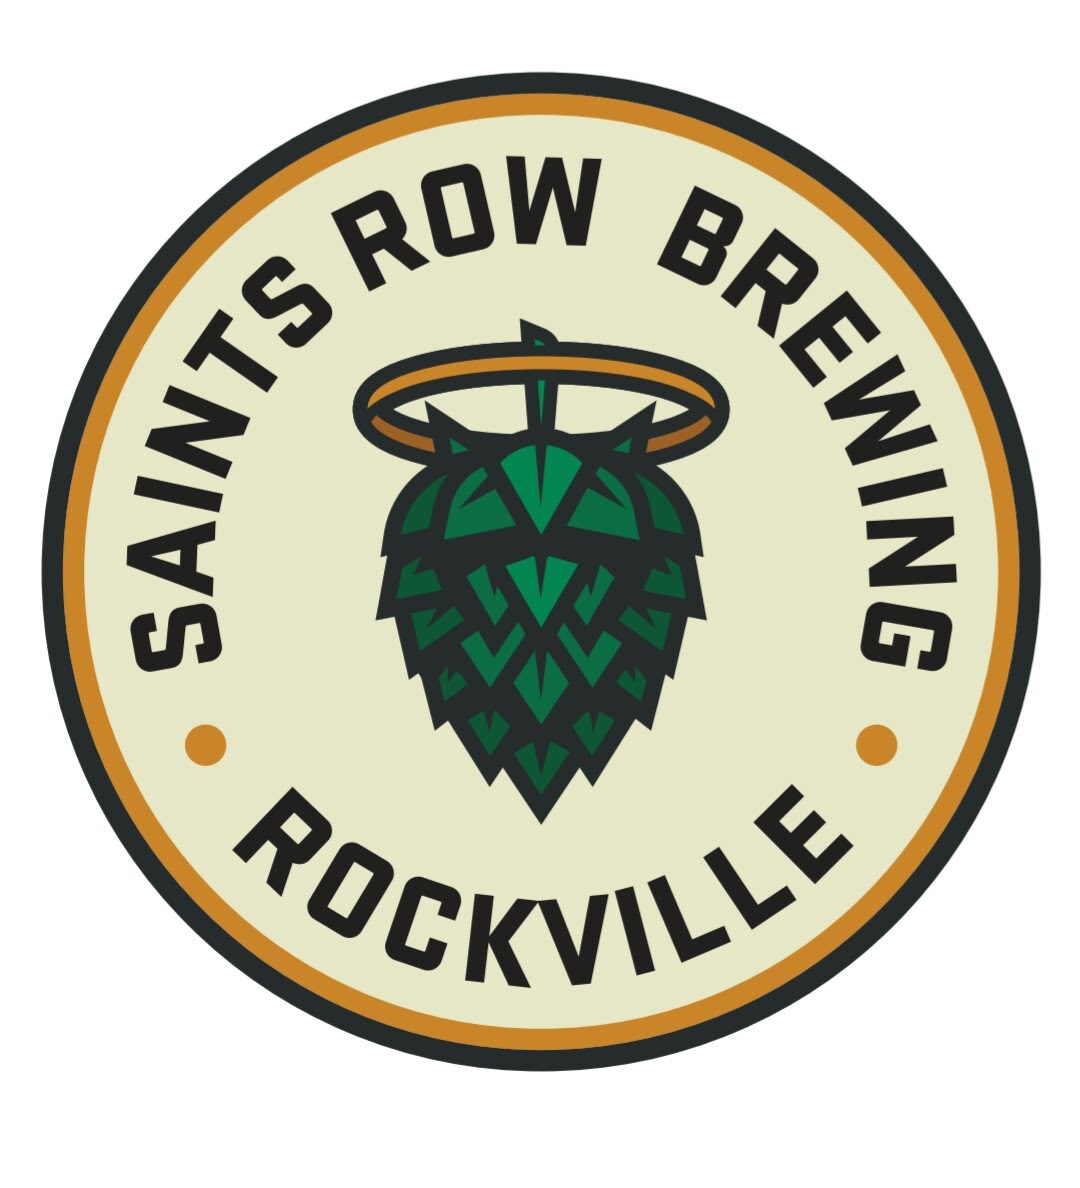 “Saints Row Brewing Now Open in Olde Towne Gaithersburg” – The MoCo Show